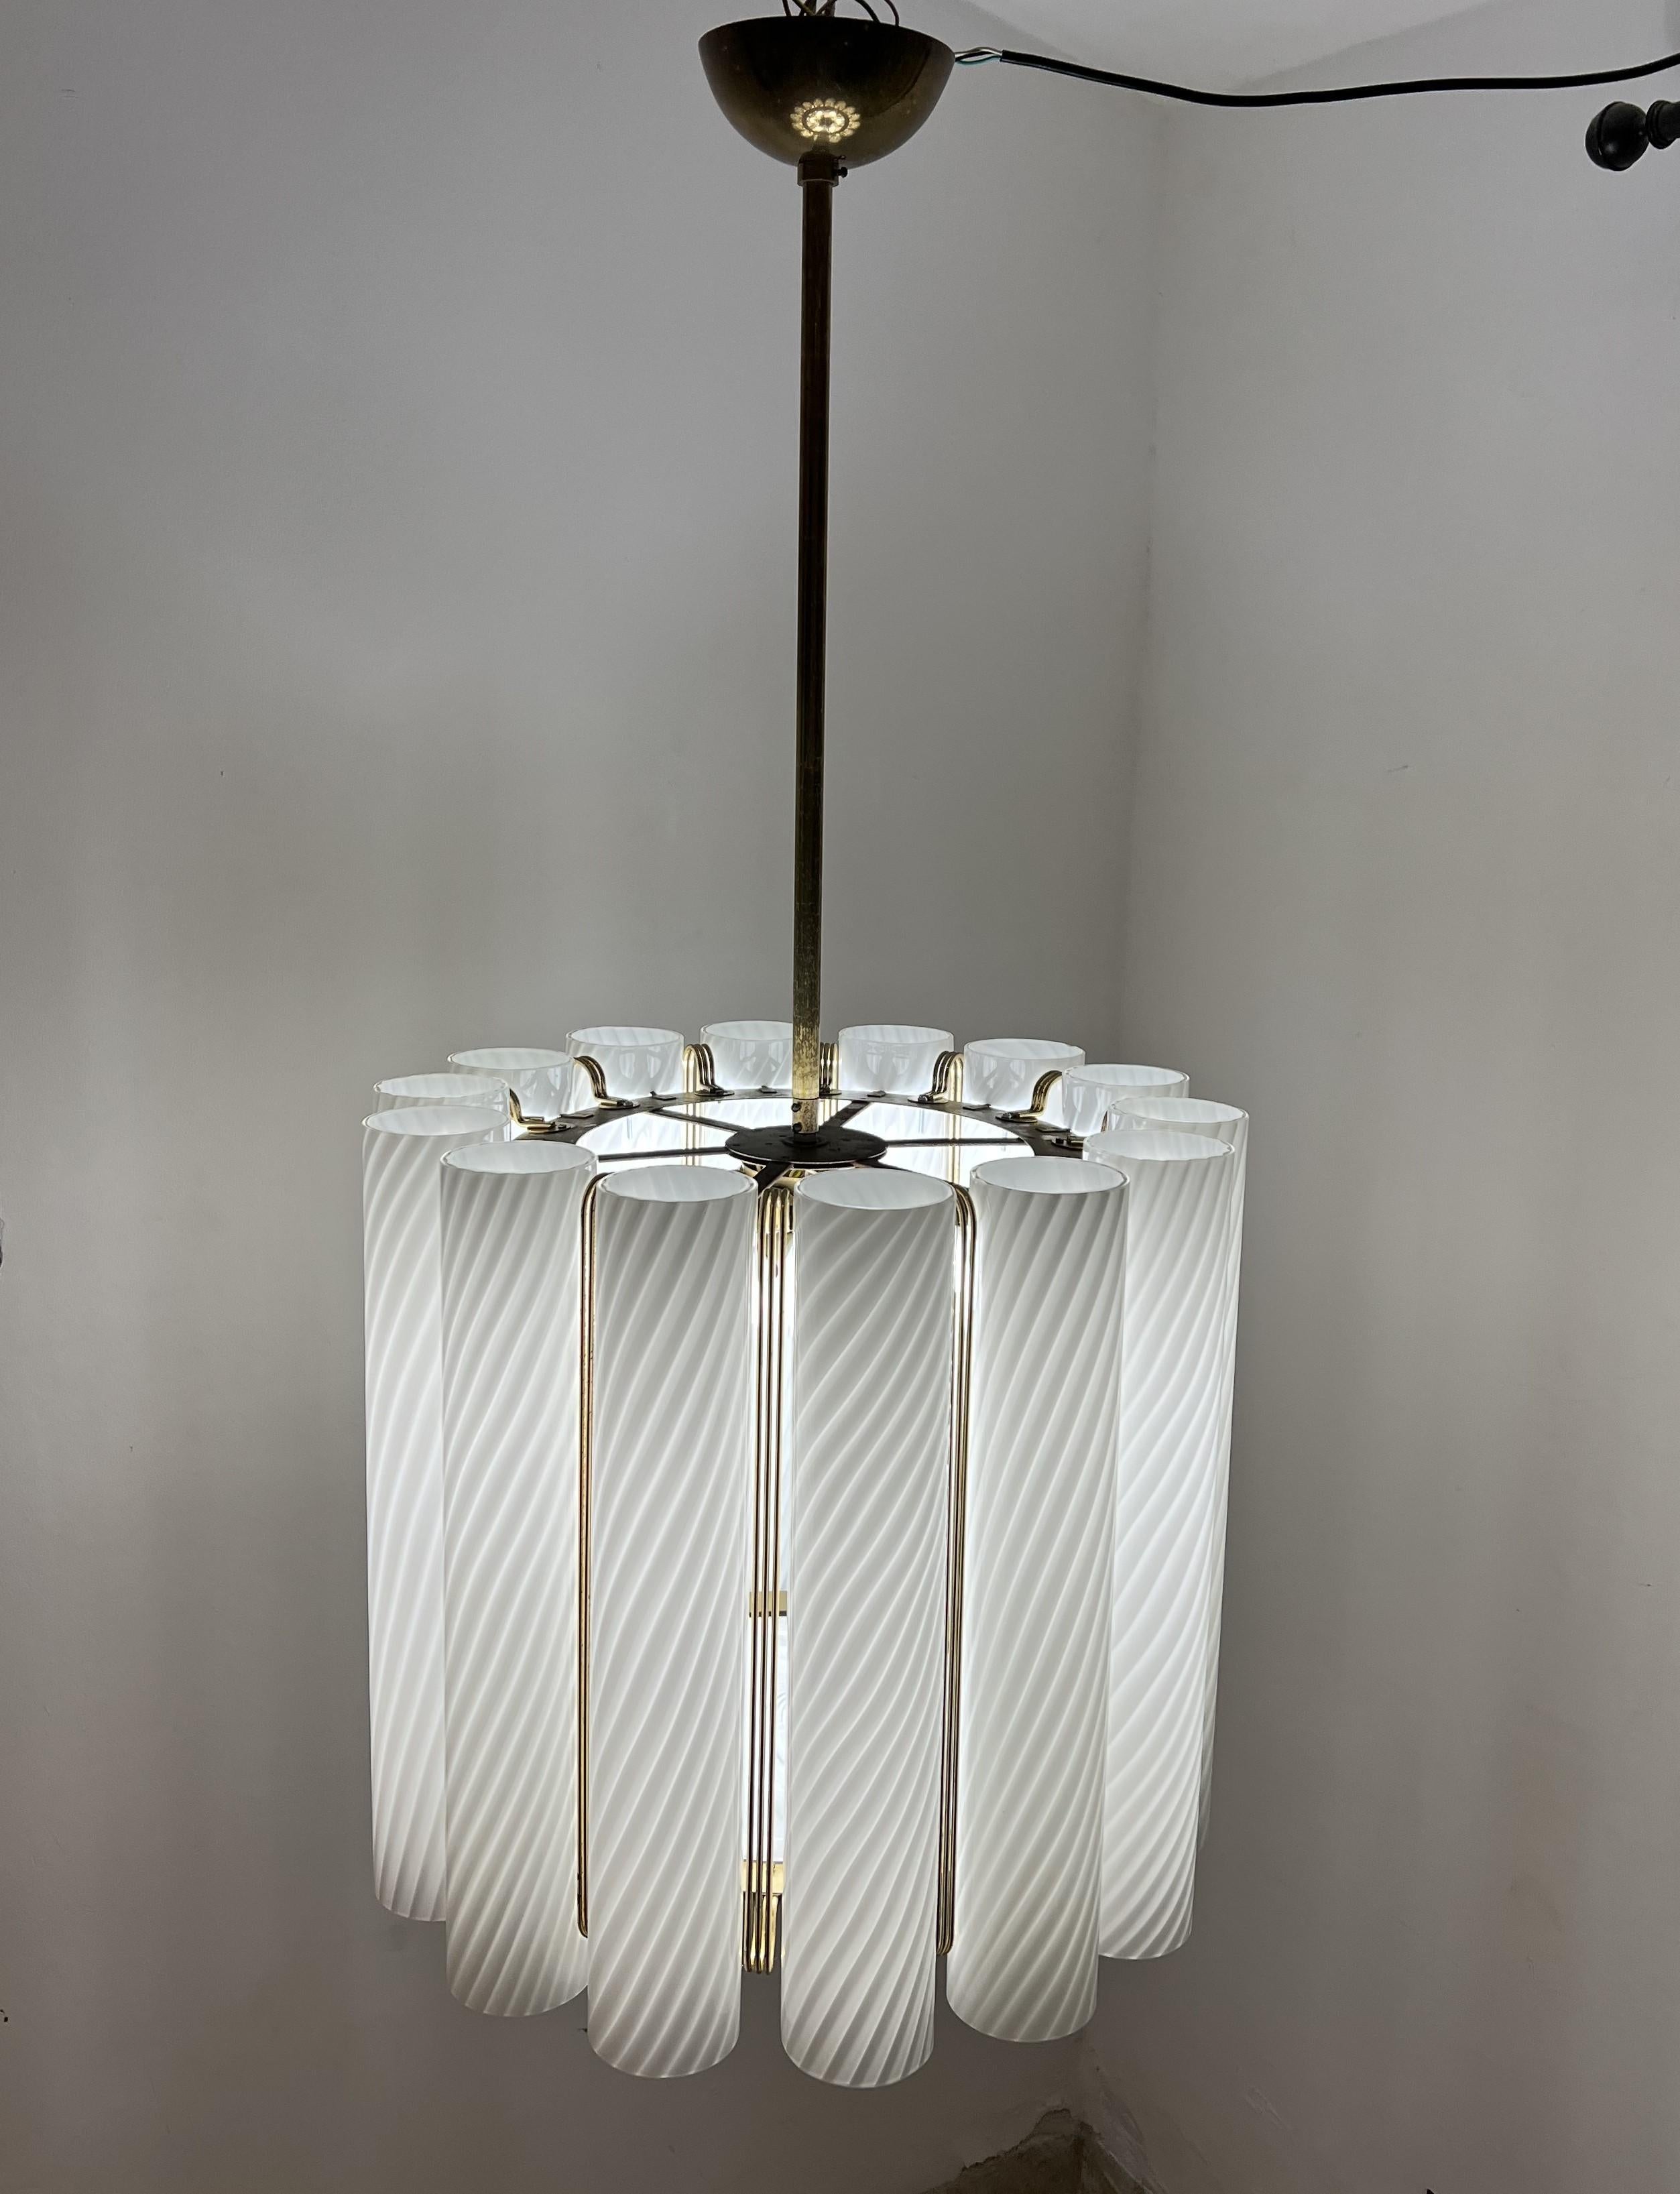 Metal Mid Century Modern Chandelier Attr. to Venini in Murano Glass, Italy circa 1970 For Sale